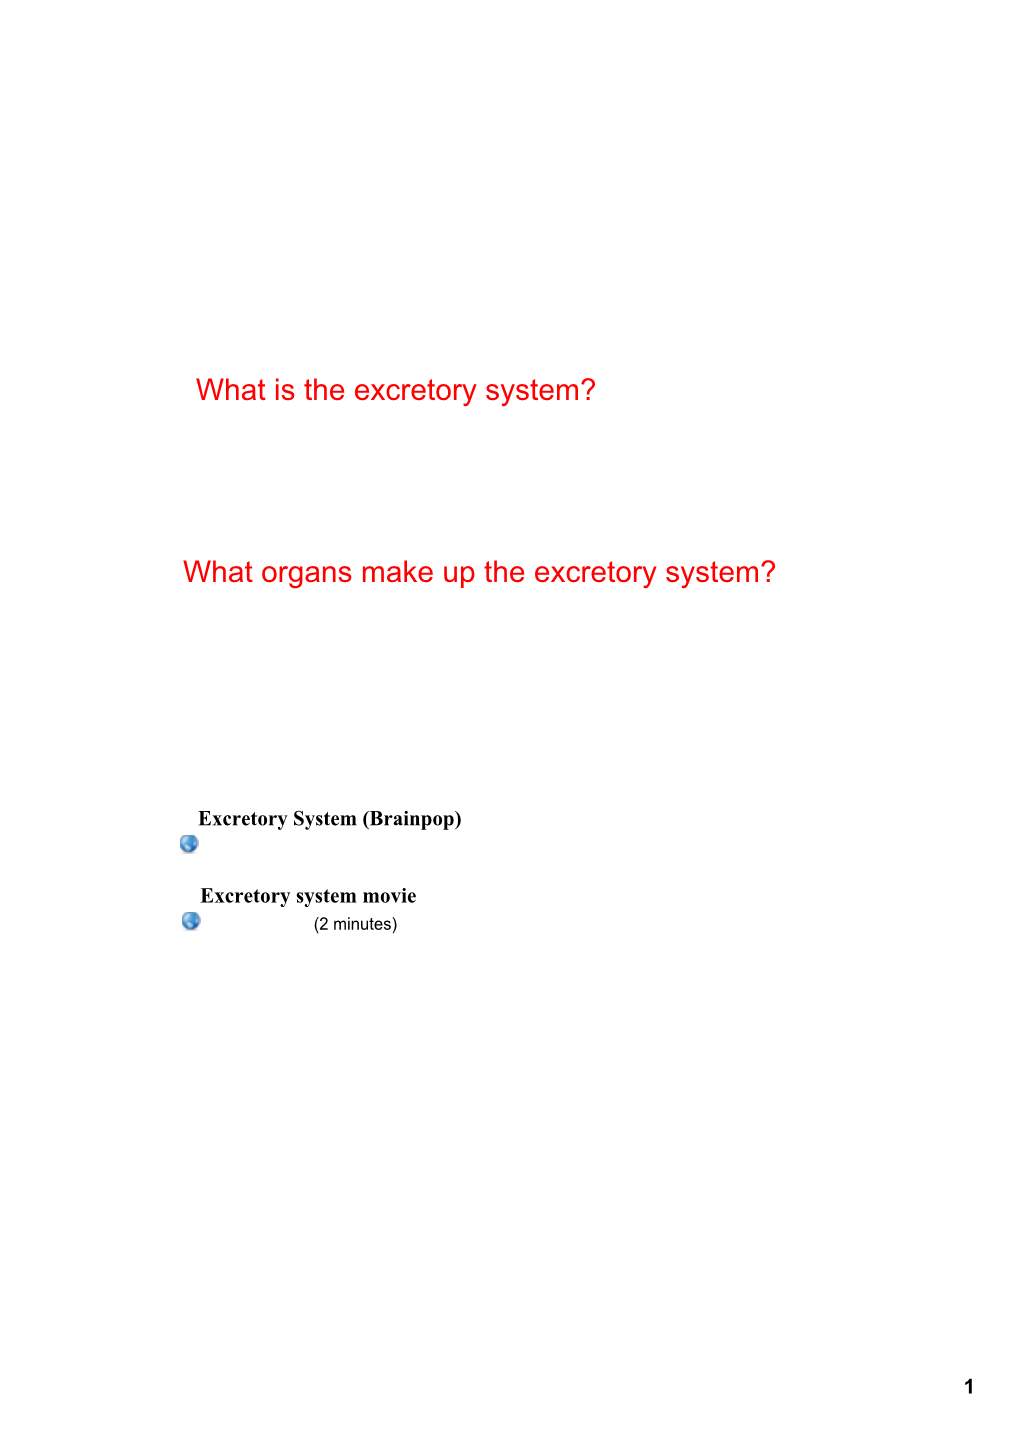 What Organs Make up the Excretory System? What Is the Excretory